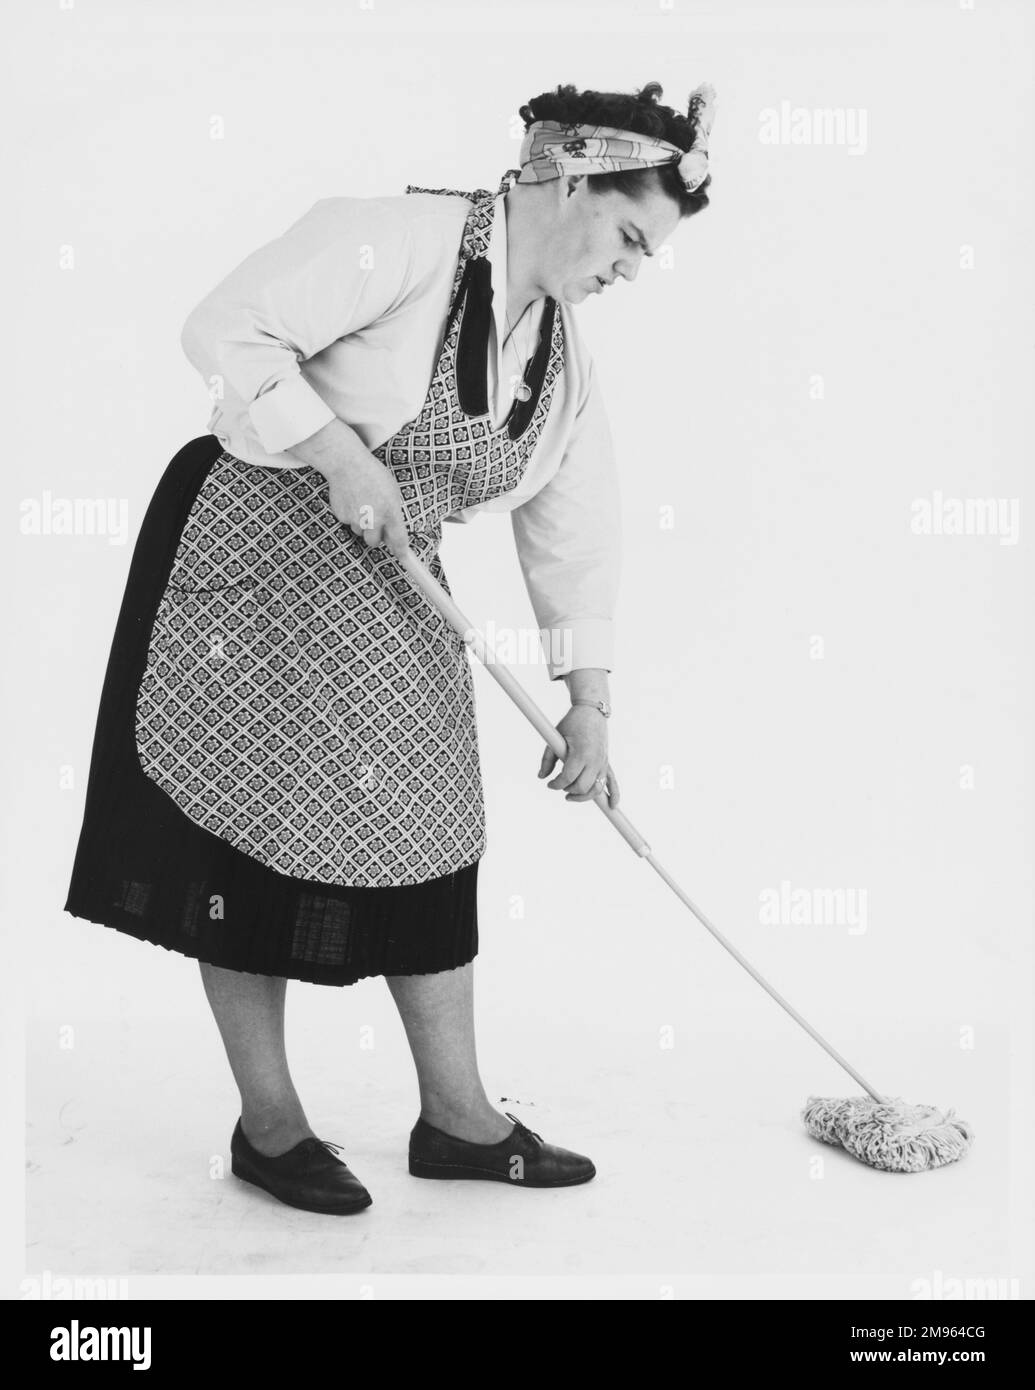 A stereotypical cleaner mopping the floor. Stock Photo